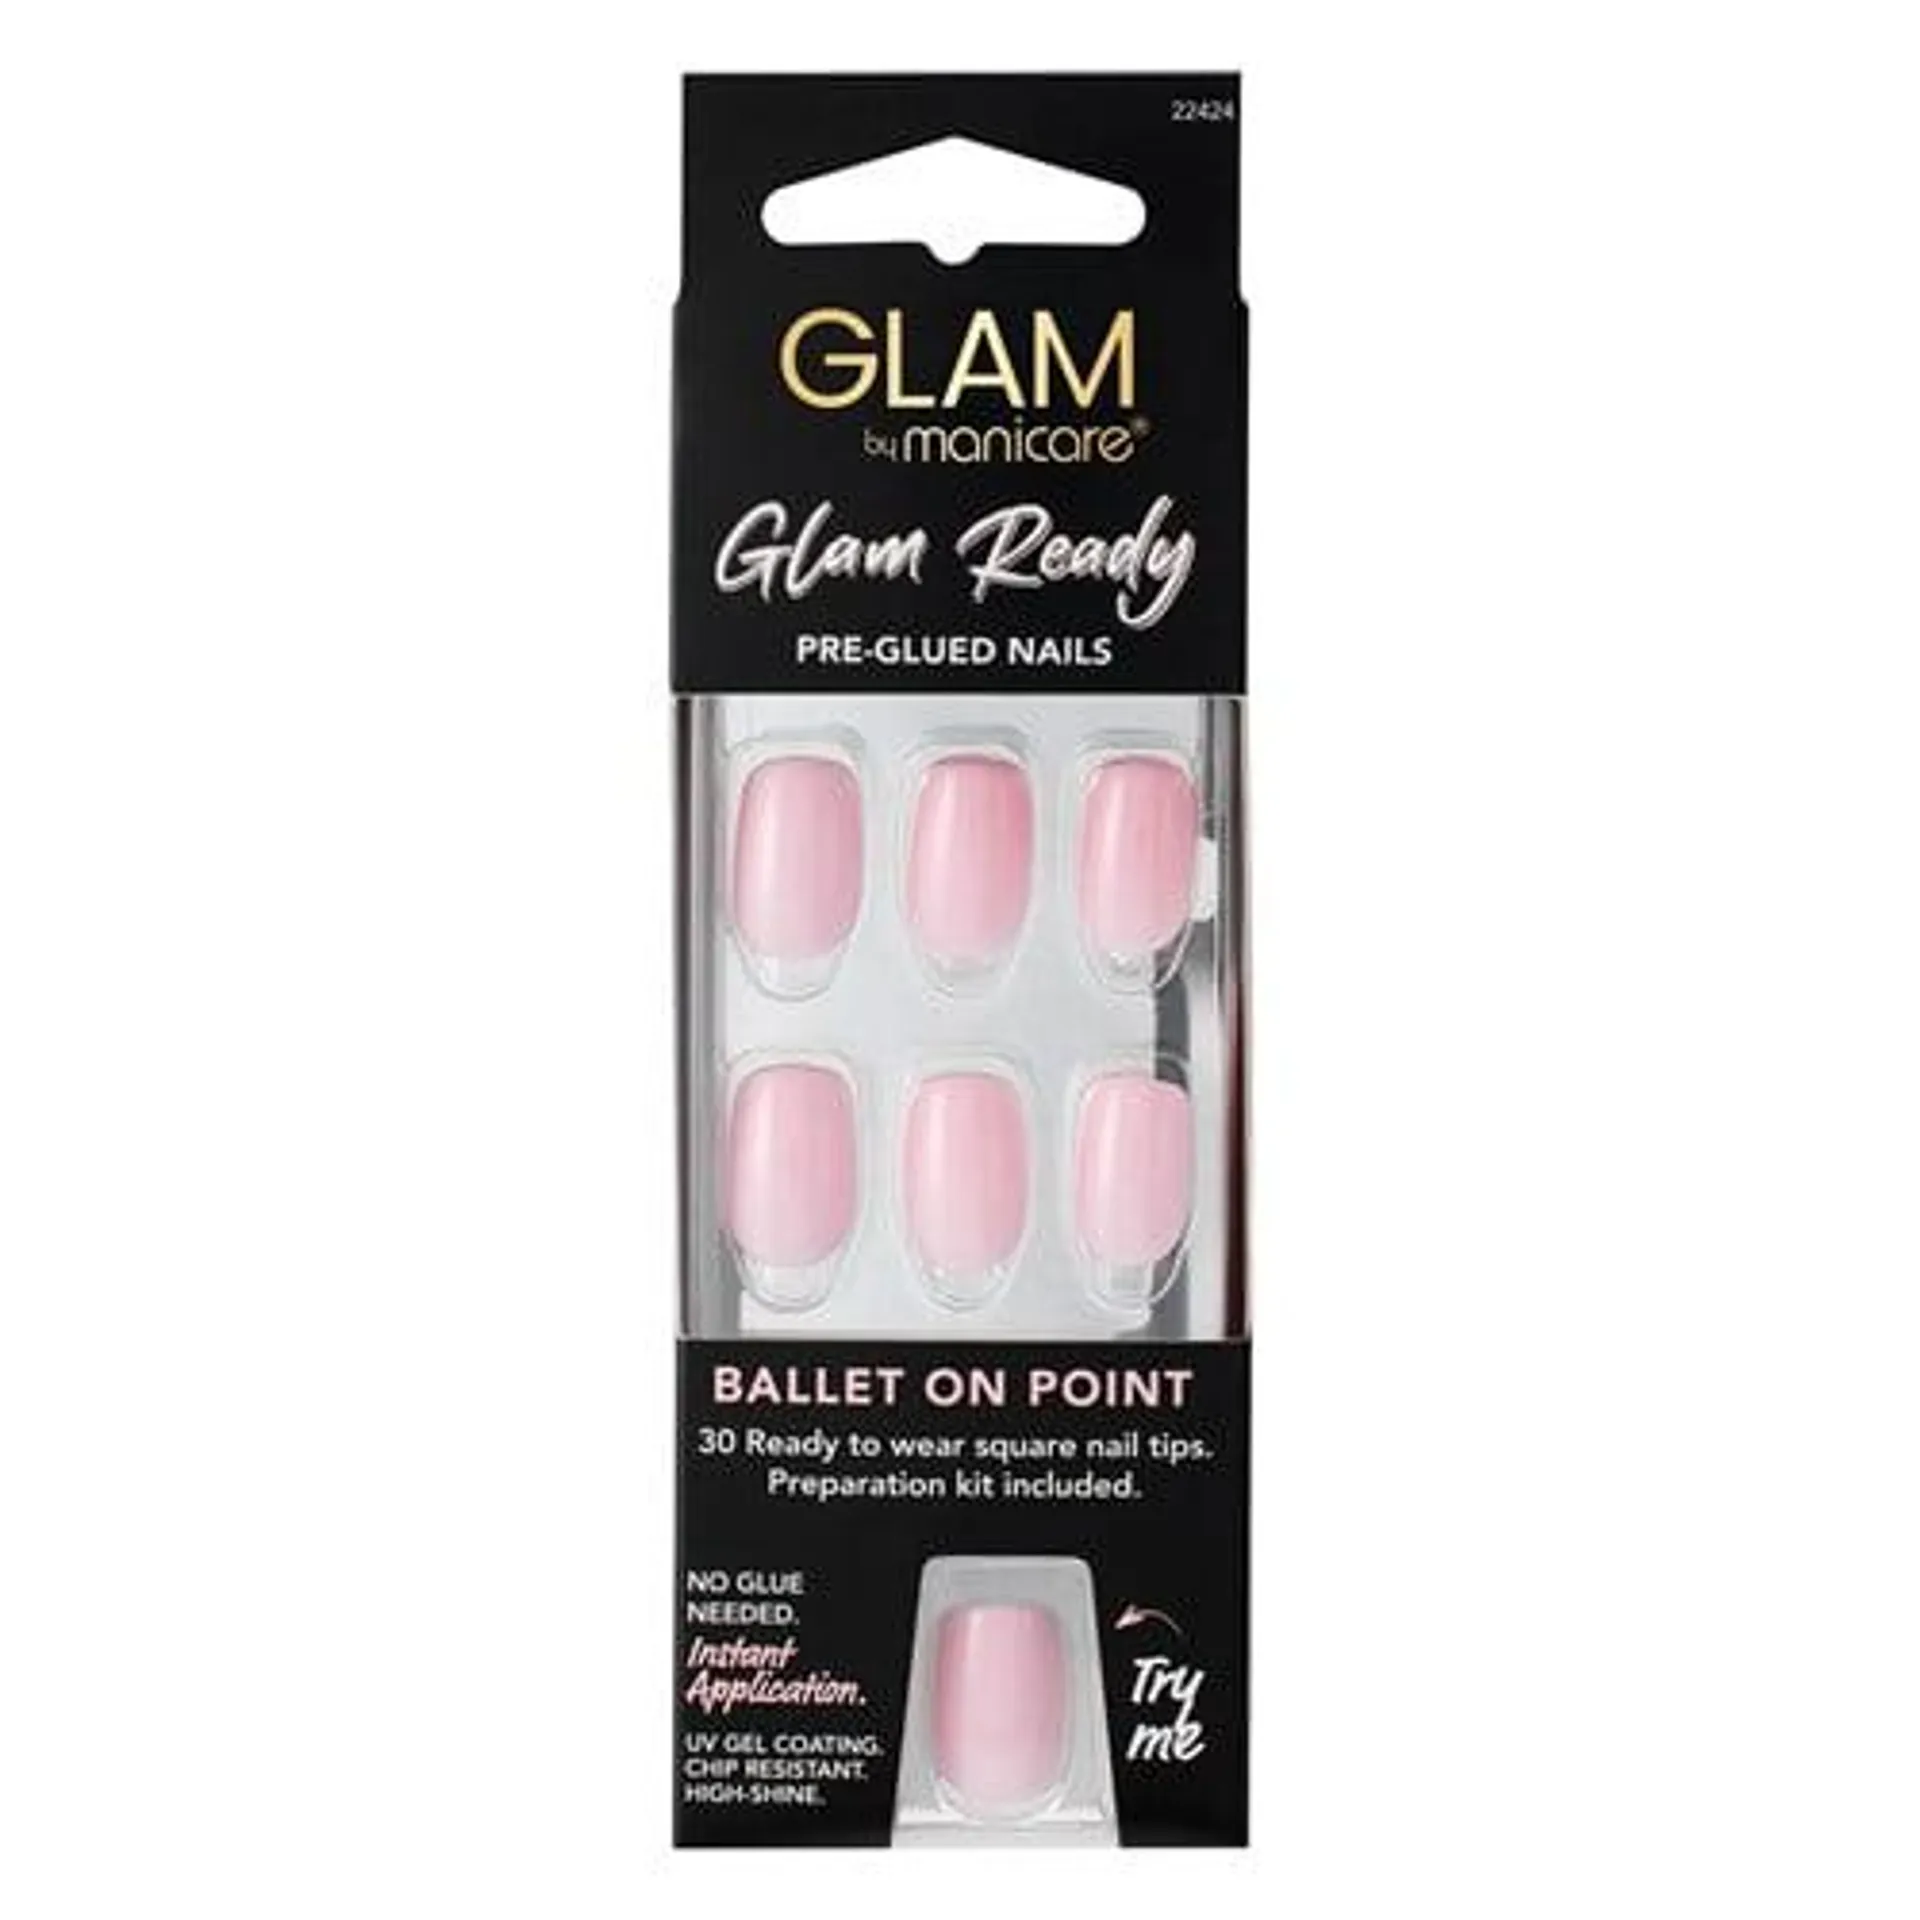 Glam by Manicare Glam Ready Pre-Glued Nails Ballet on Point 30pcs